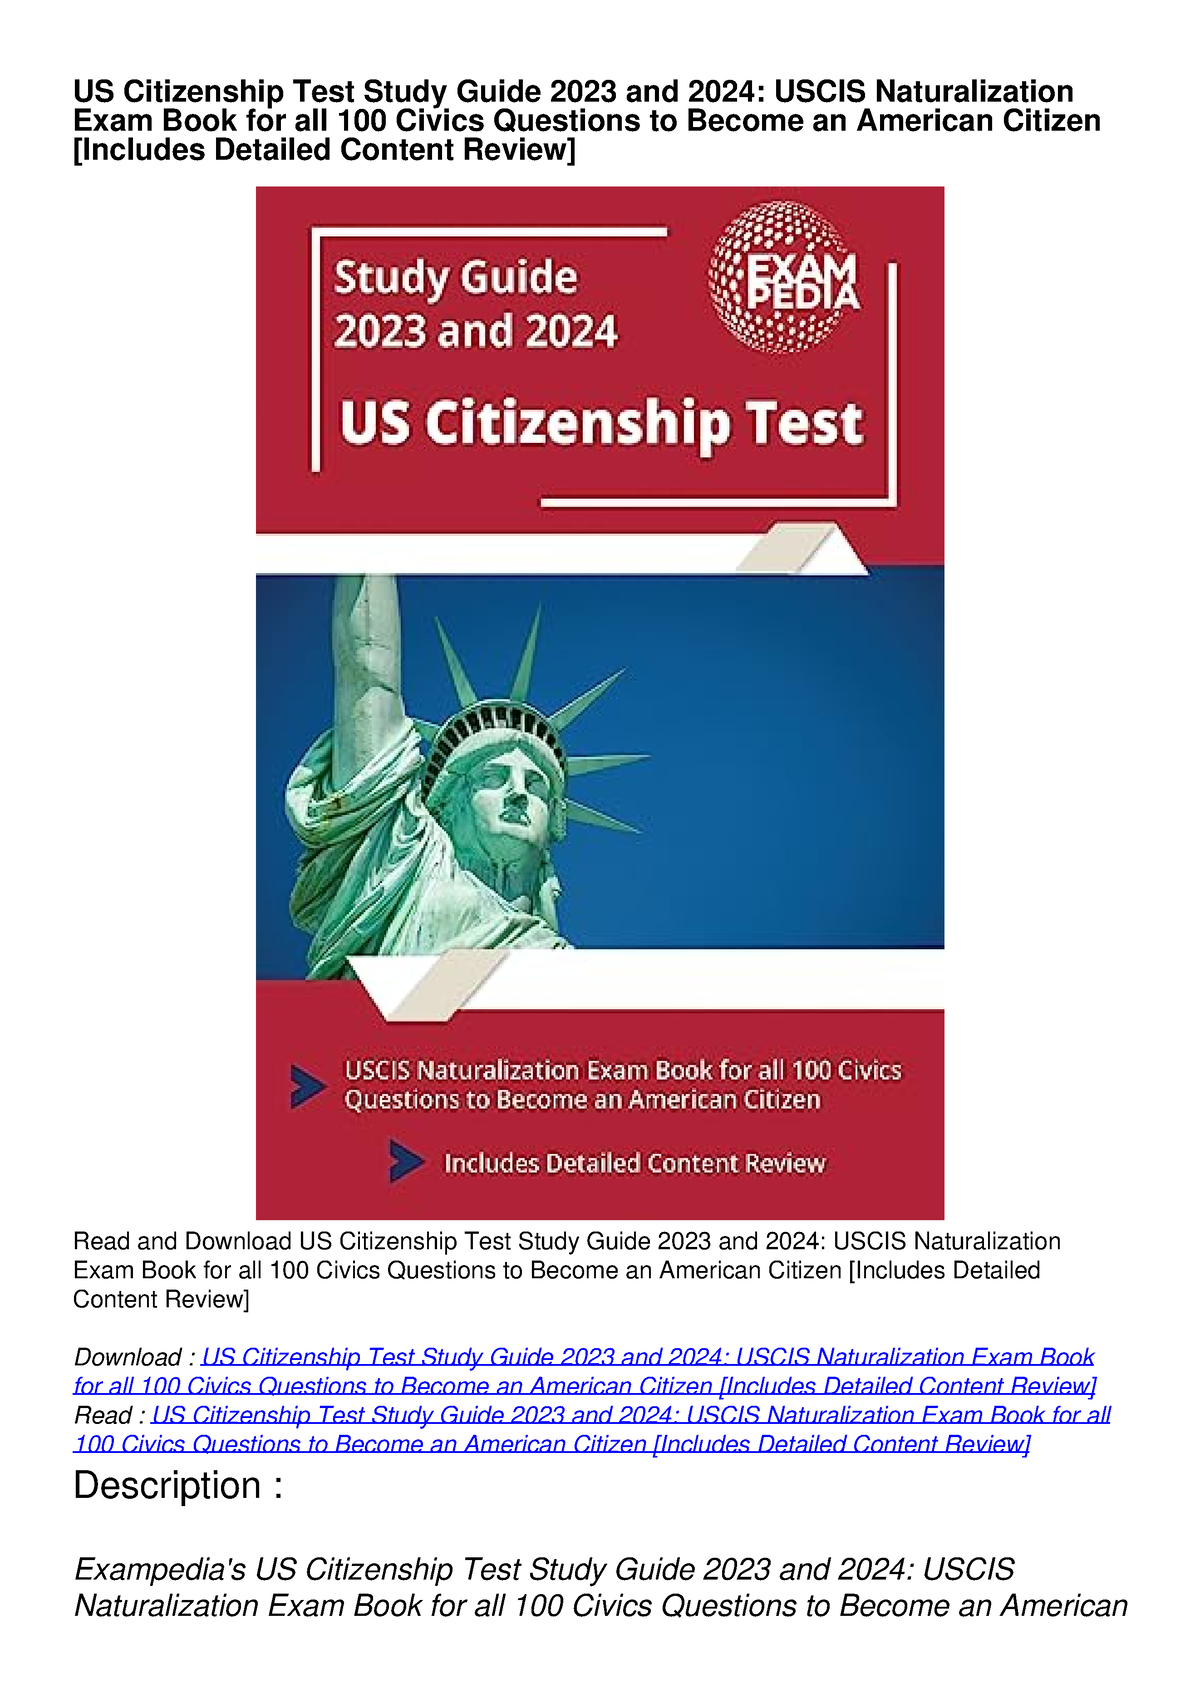 PDF/READ/DOWNLOAD US Citizenship Test Study Guide 2023 and 2024 USCIS